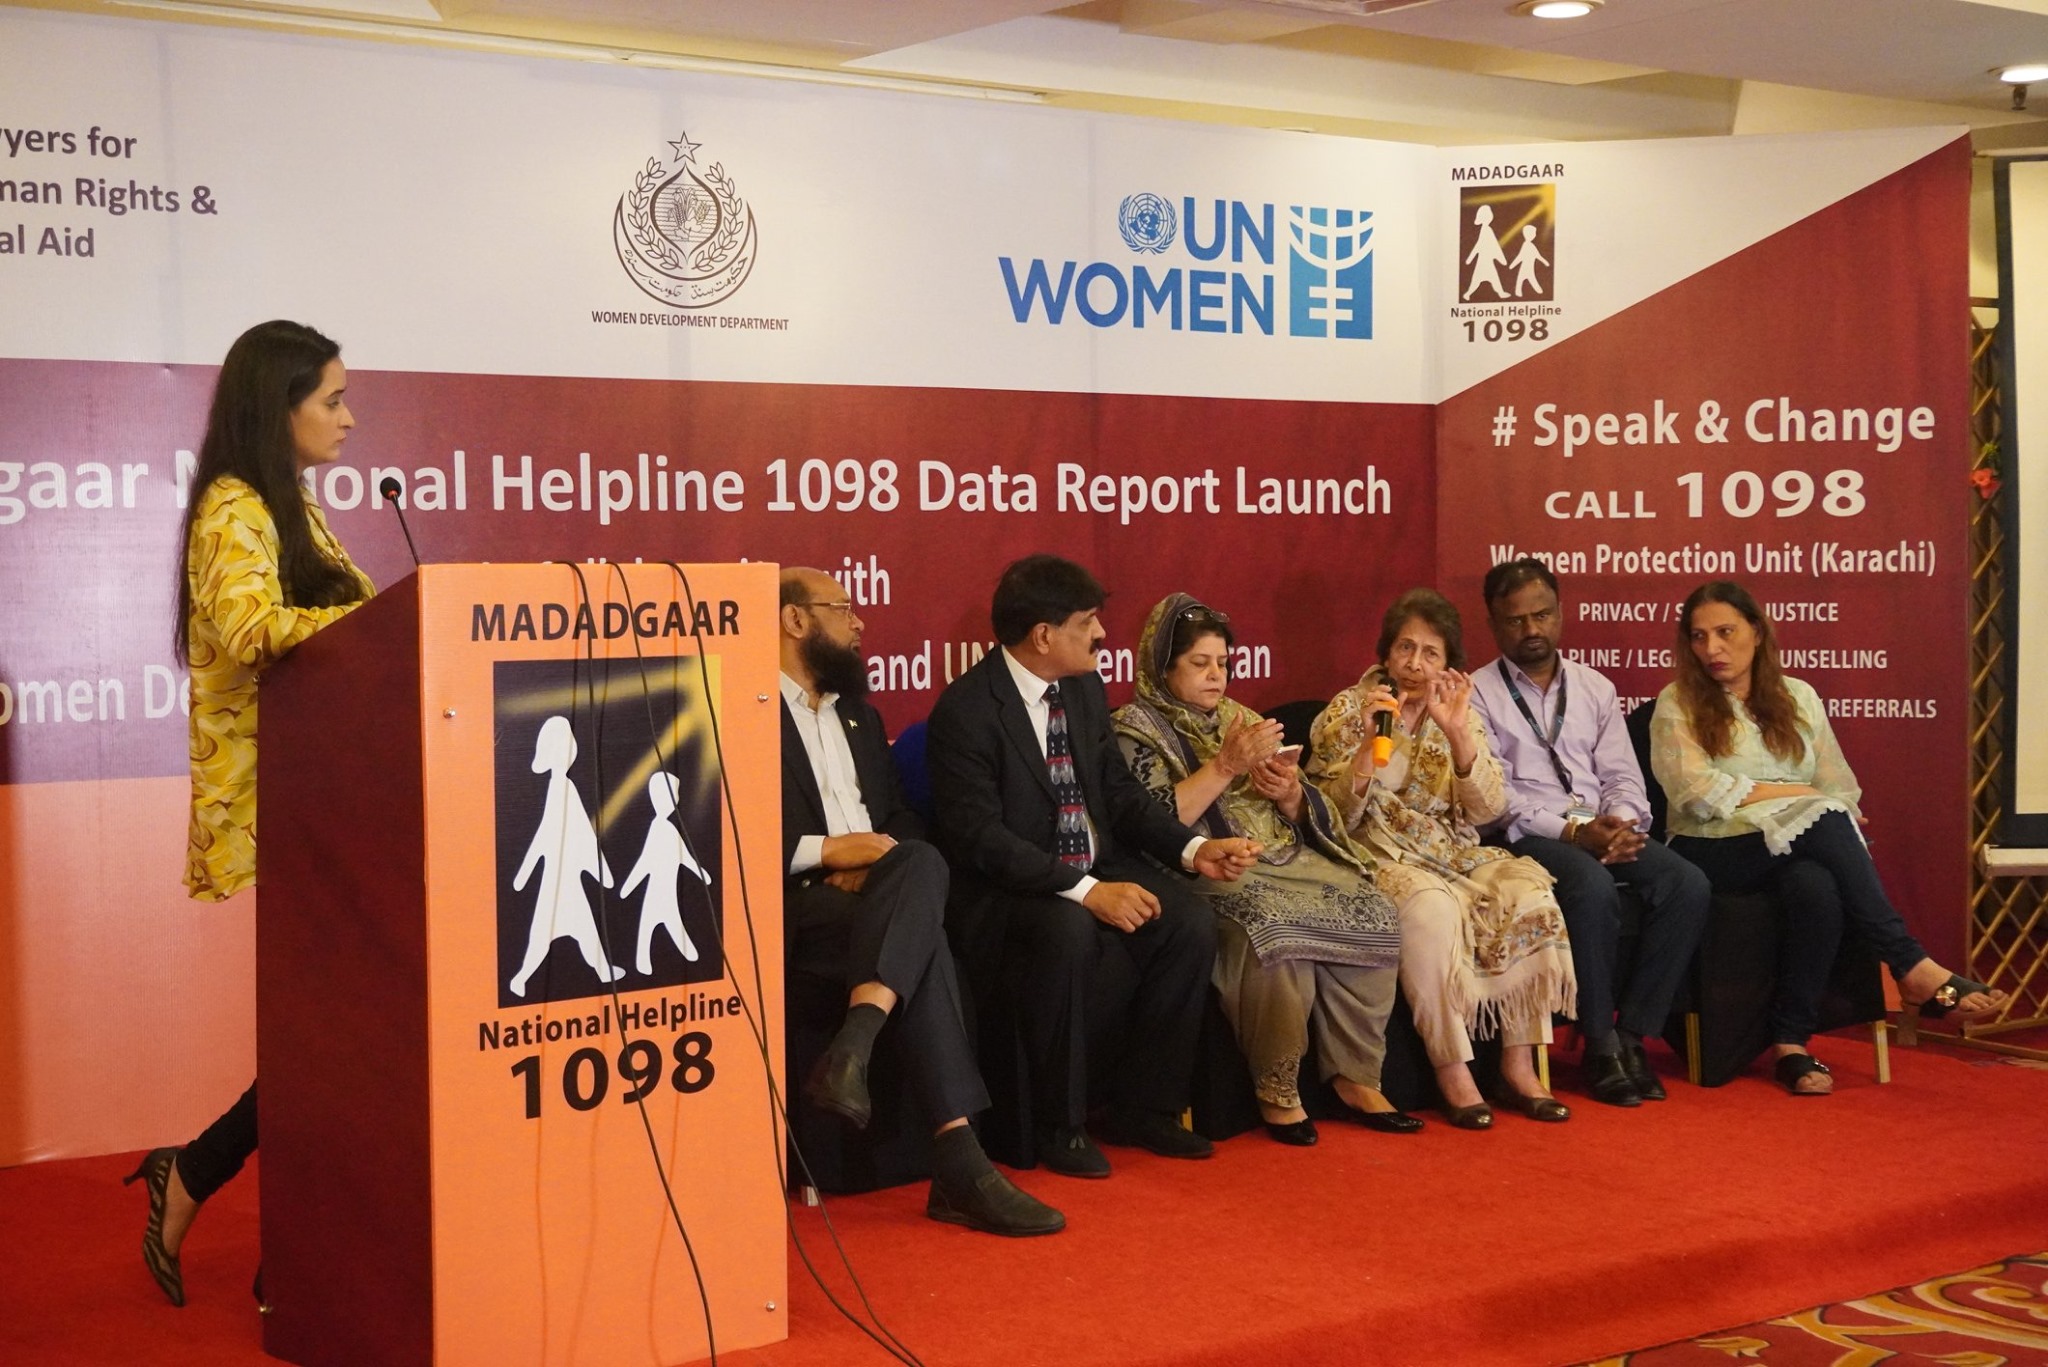 Report Launching Ceremony of Lawyers for Human Rights and Legal Aid